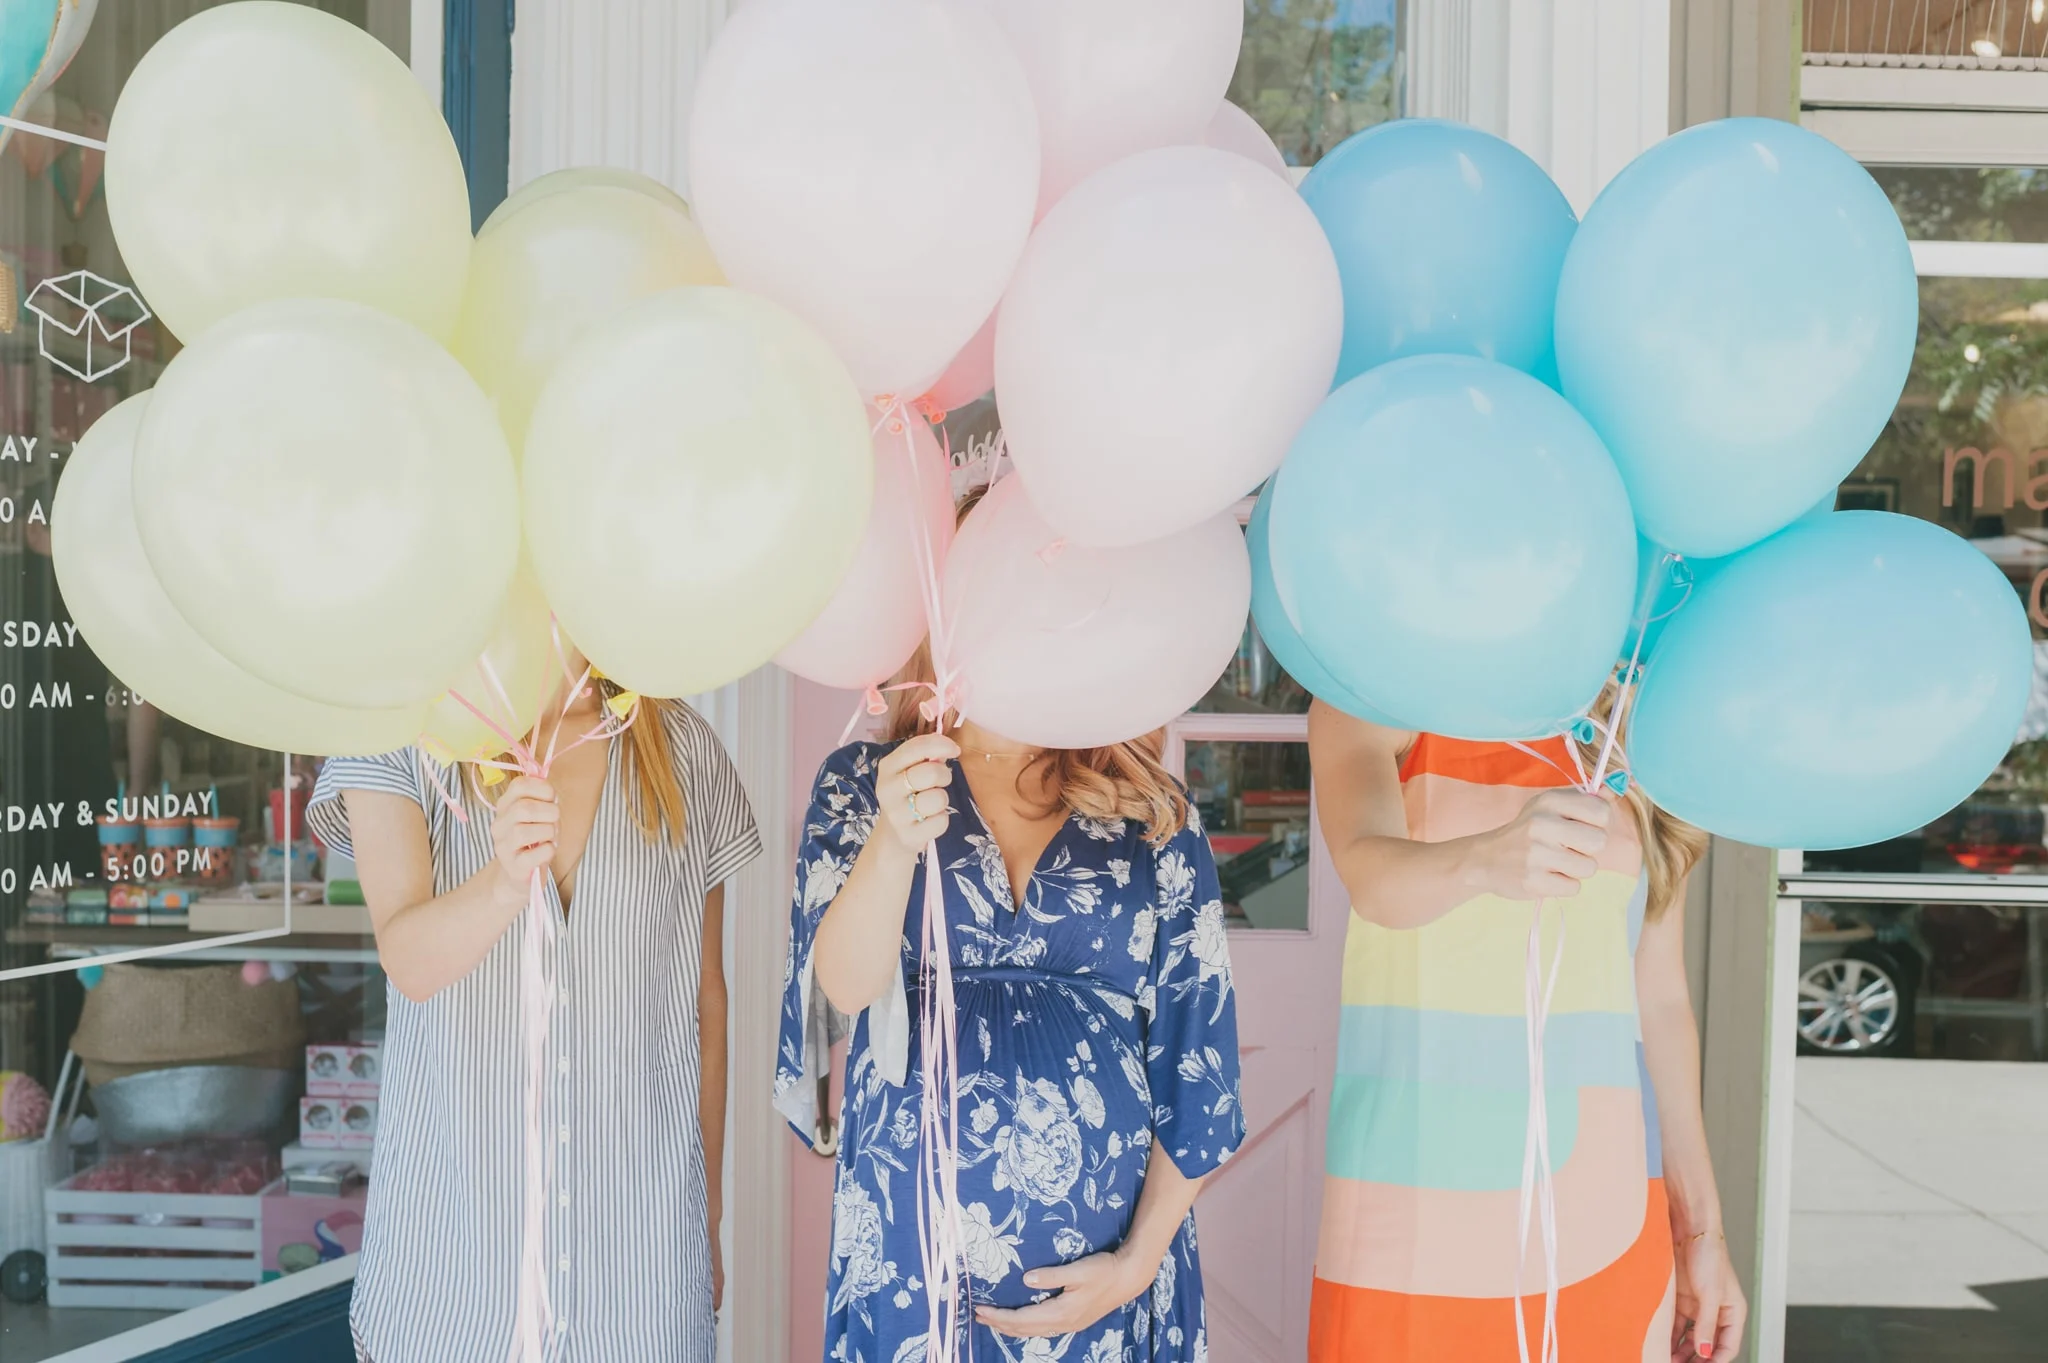 Three girls holding yellow, pink and blue balloon bunches in front of their faces - Project Nursery